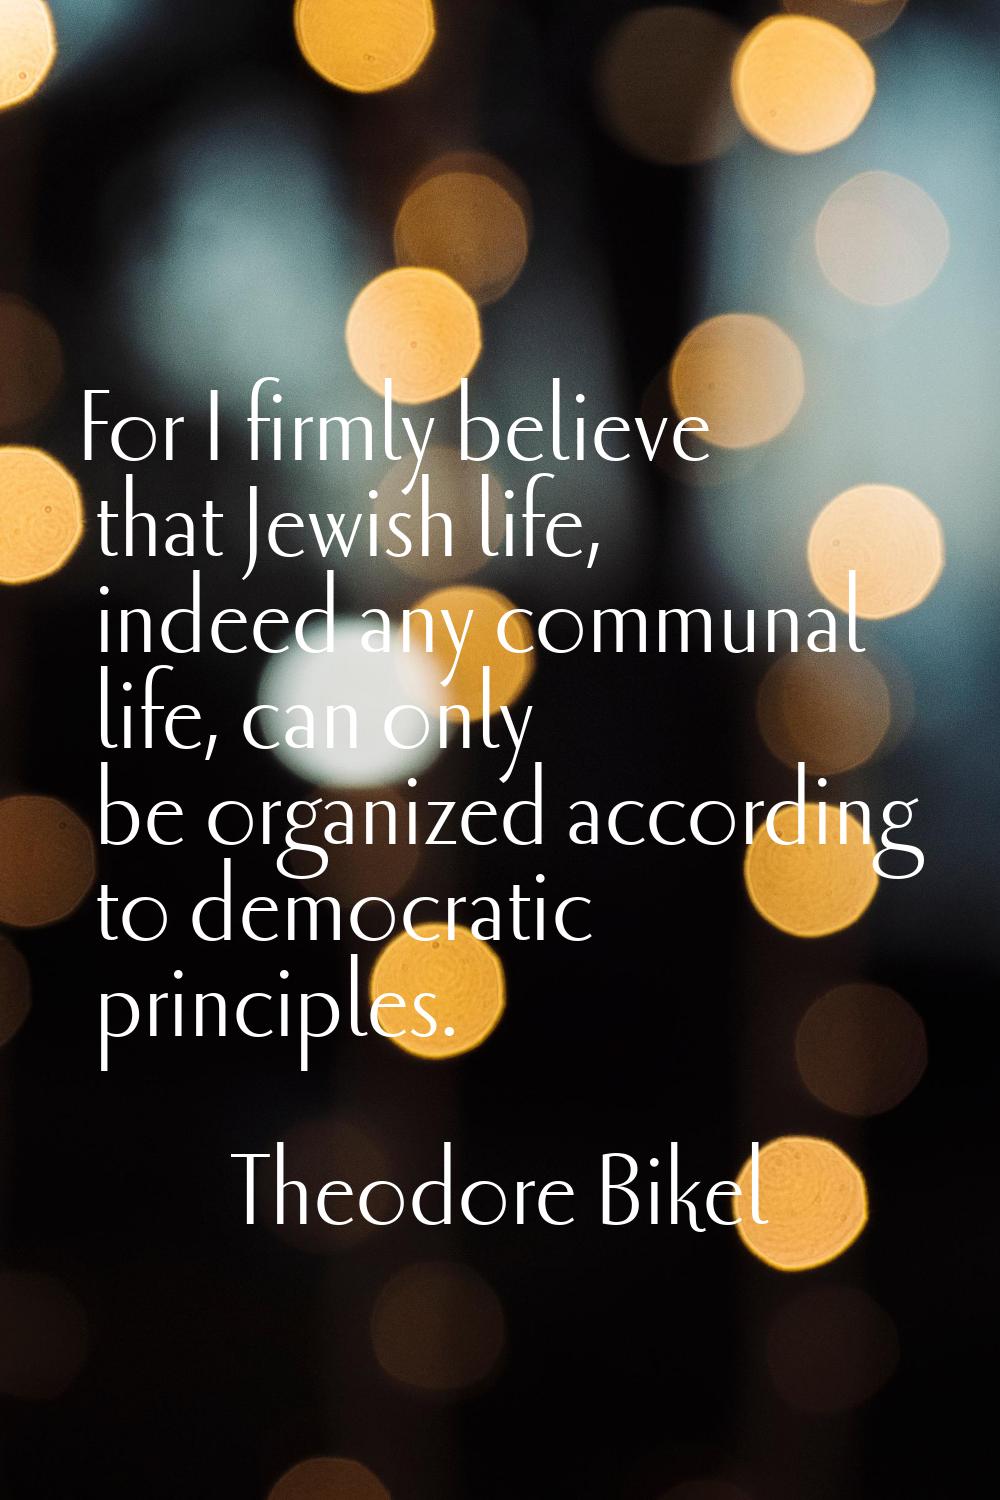 For I firmly believe that Jewish life, indeed any communal life, can only be organized according to